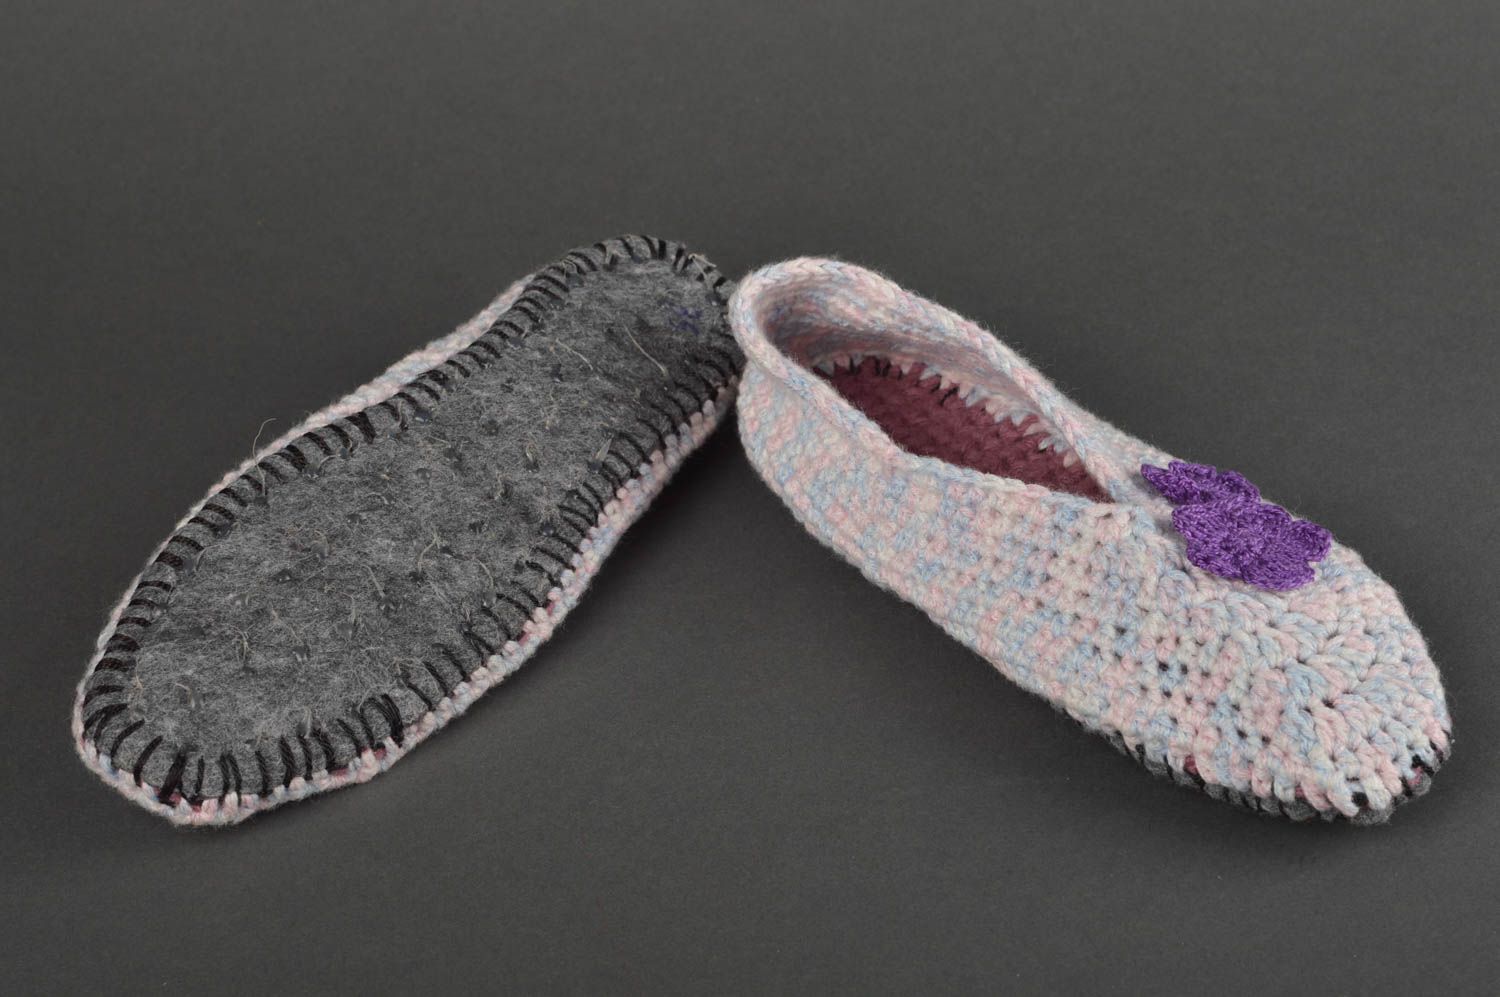 Handmade slippers warm woolen slippers for home stylish accessories for women photo 2